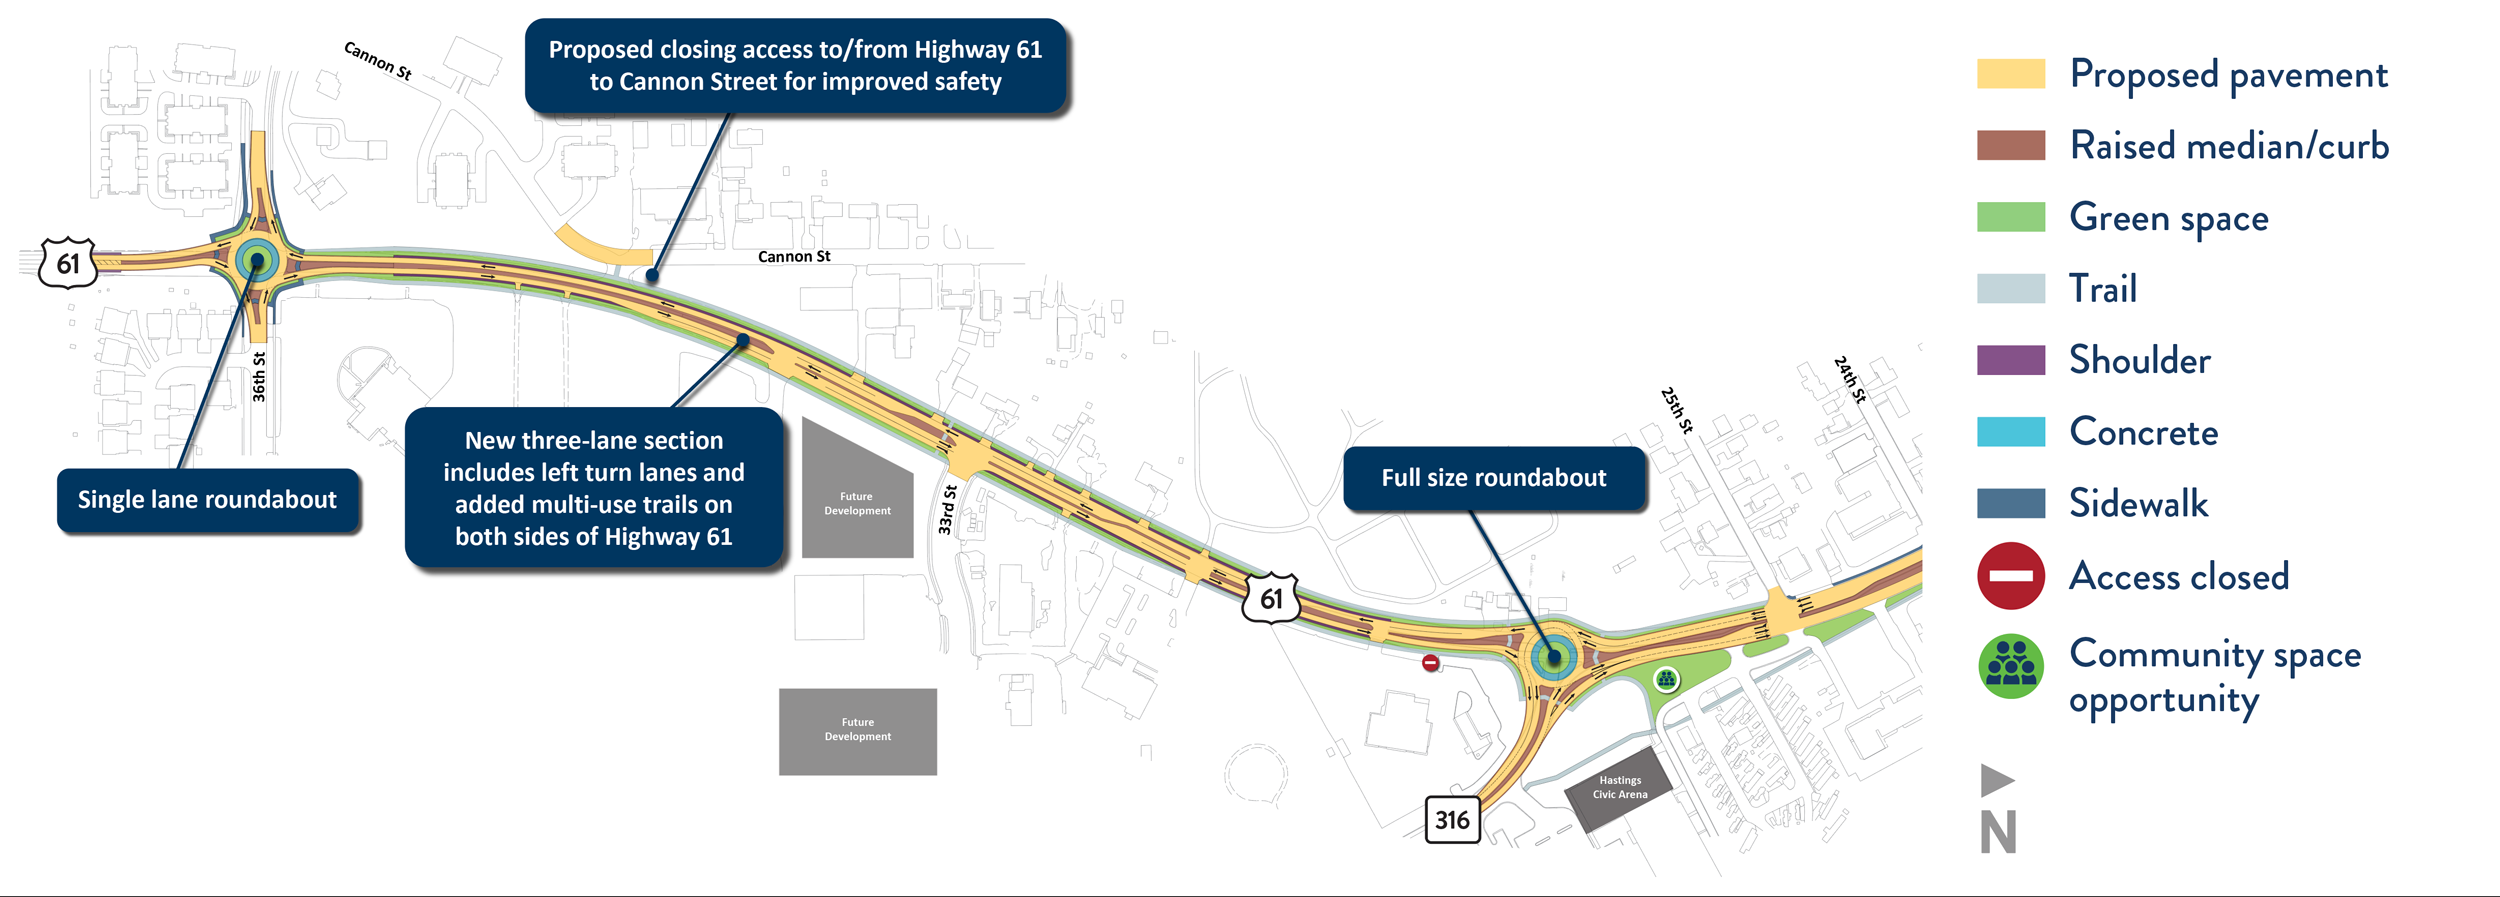 Highway 61 improvement concept in Southtown district from 25th Street to 36th Street